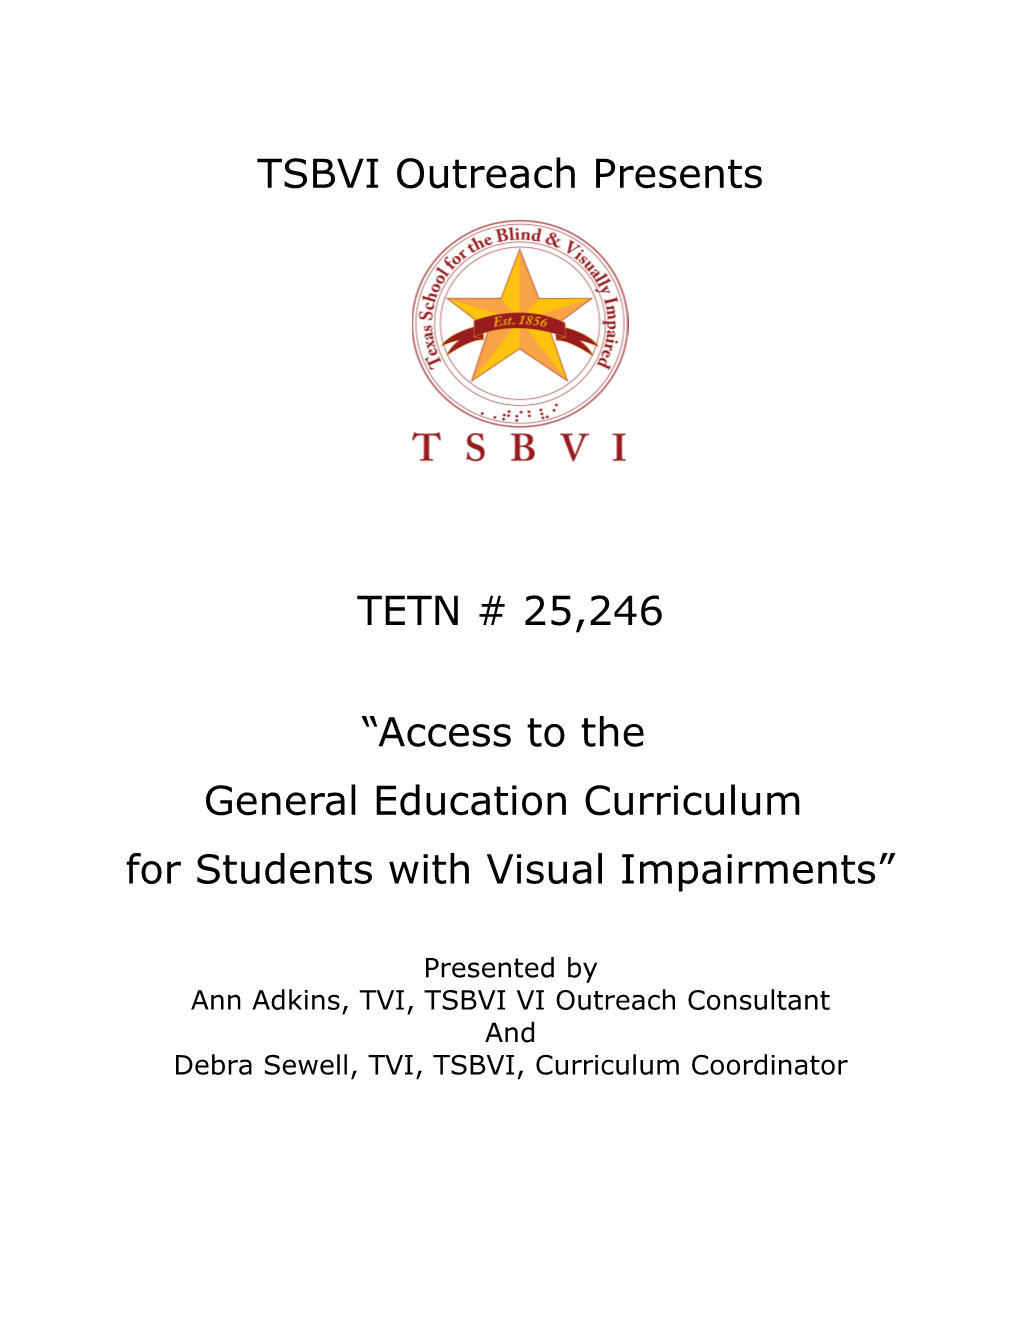 Access to the General Education Curriculum For